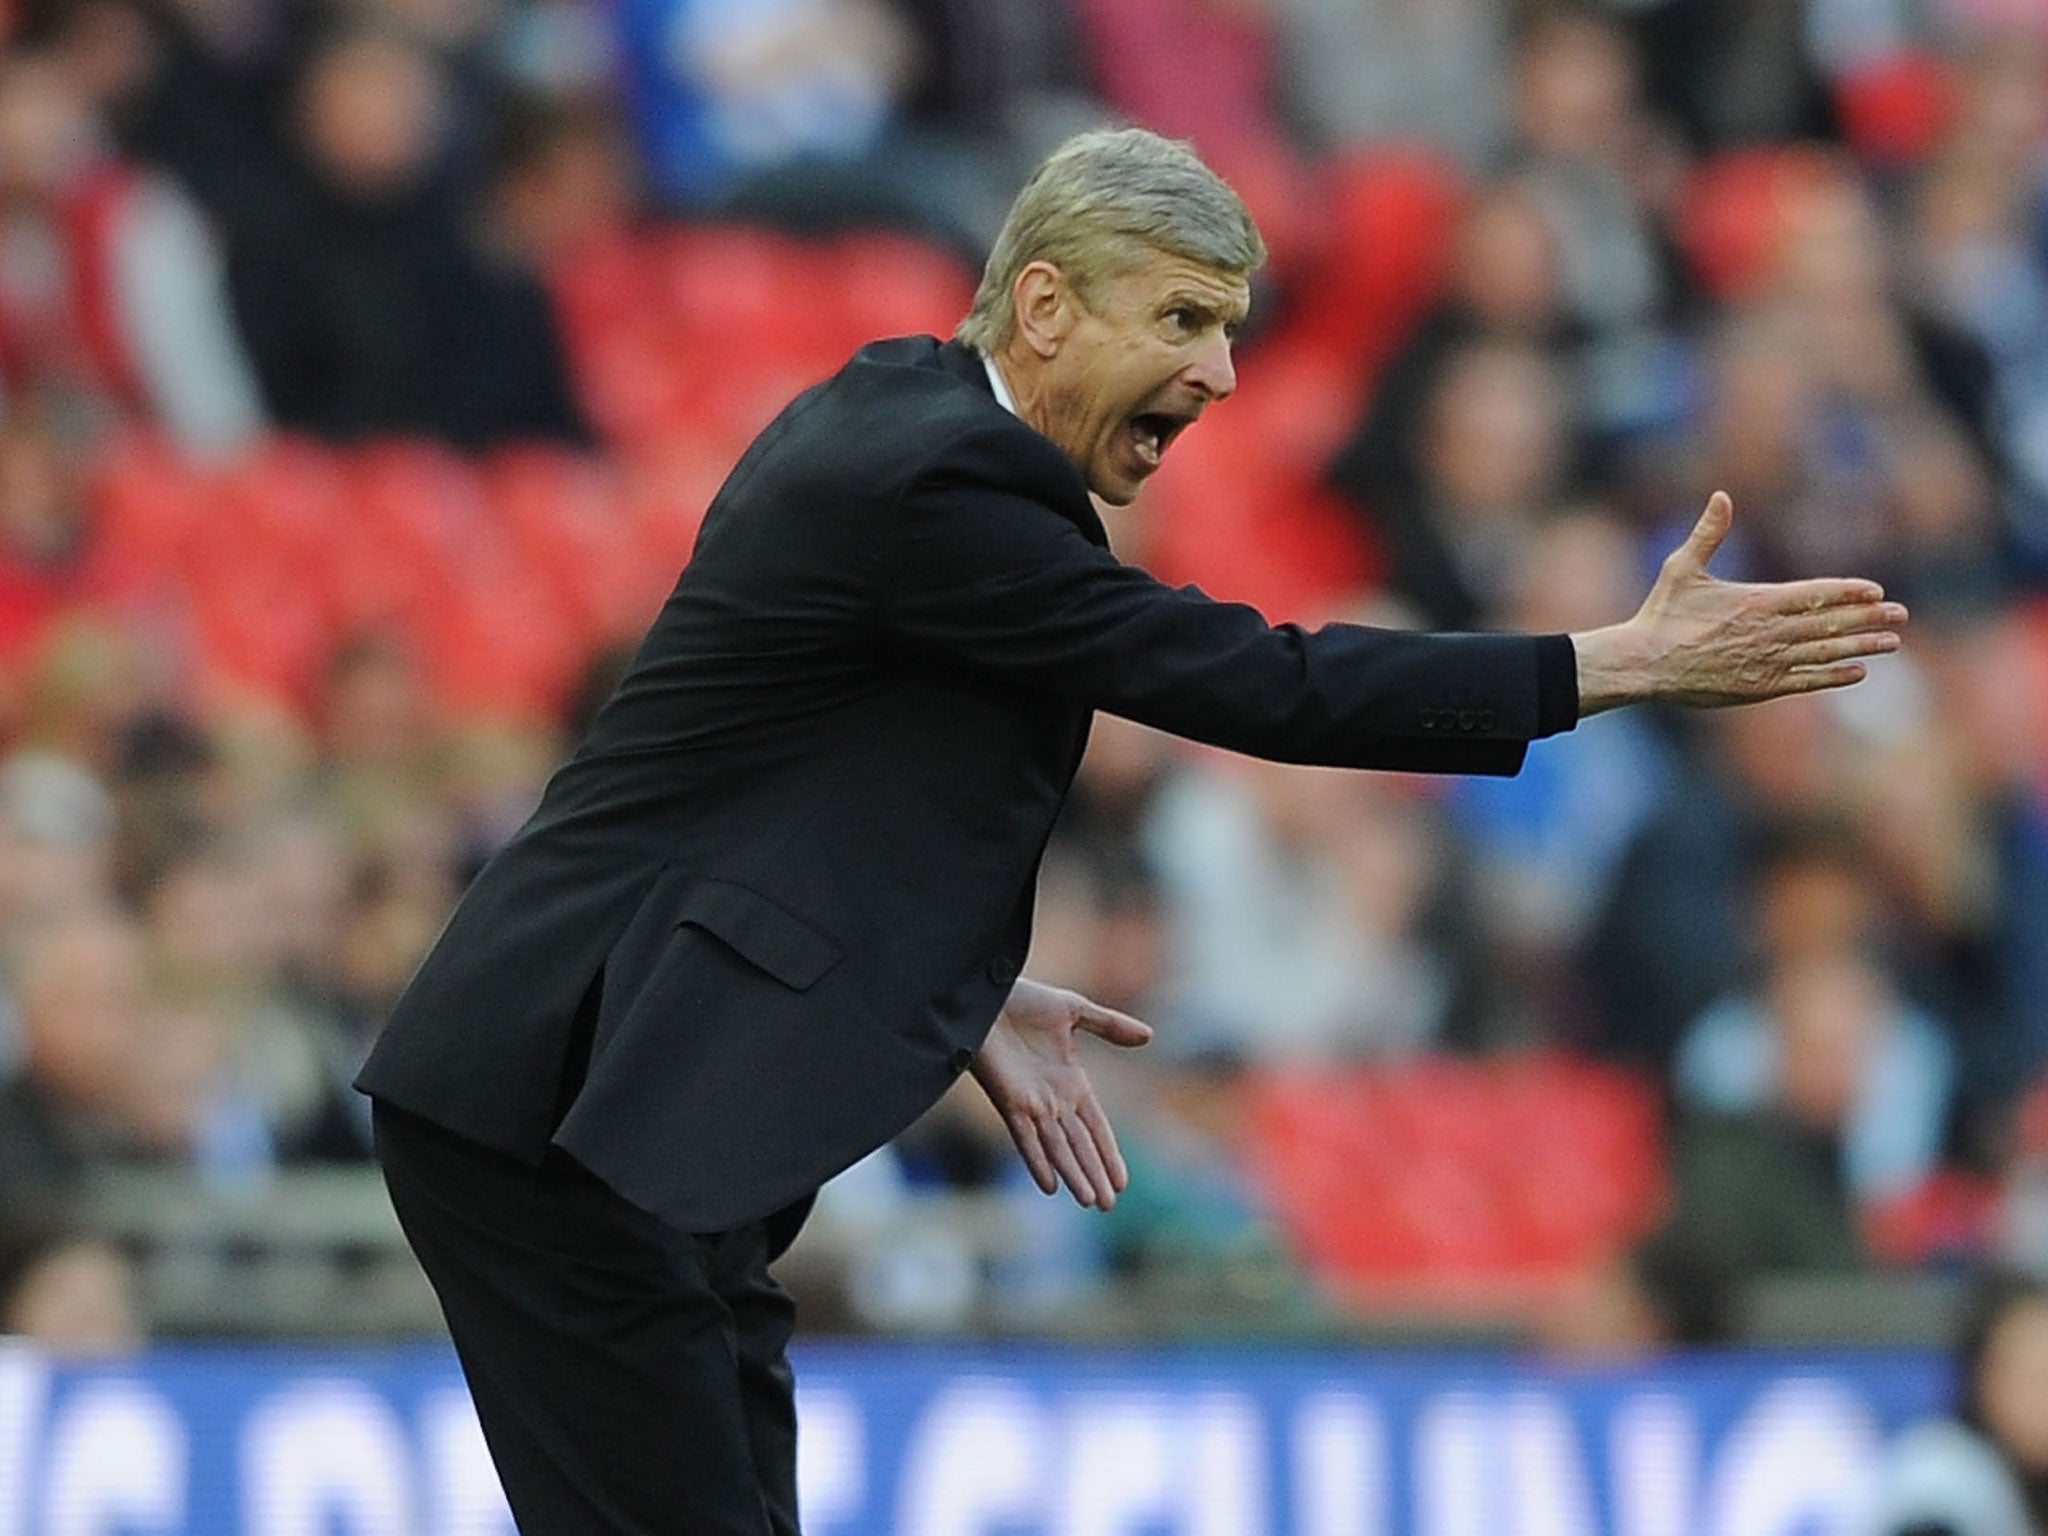 Arsene Wenger makes a gesture from the touchline at Wembley on Saturday